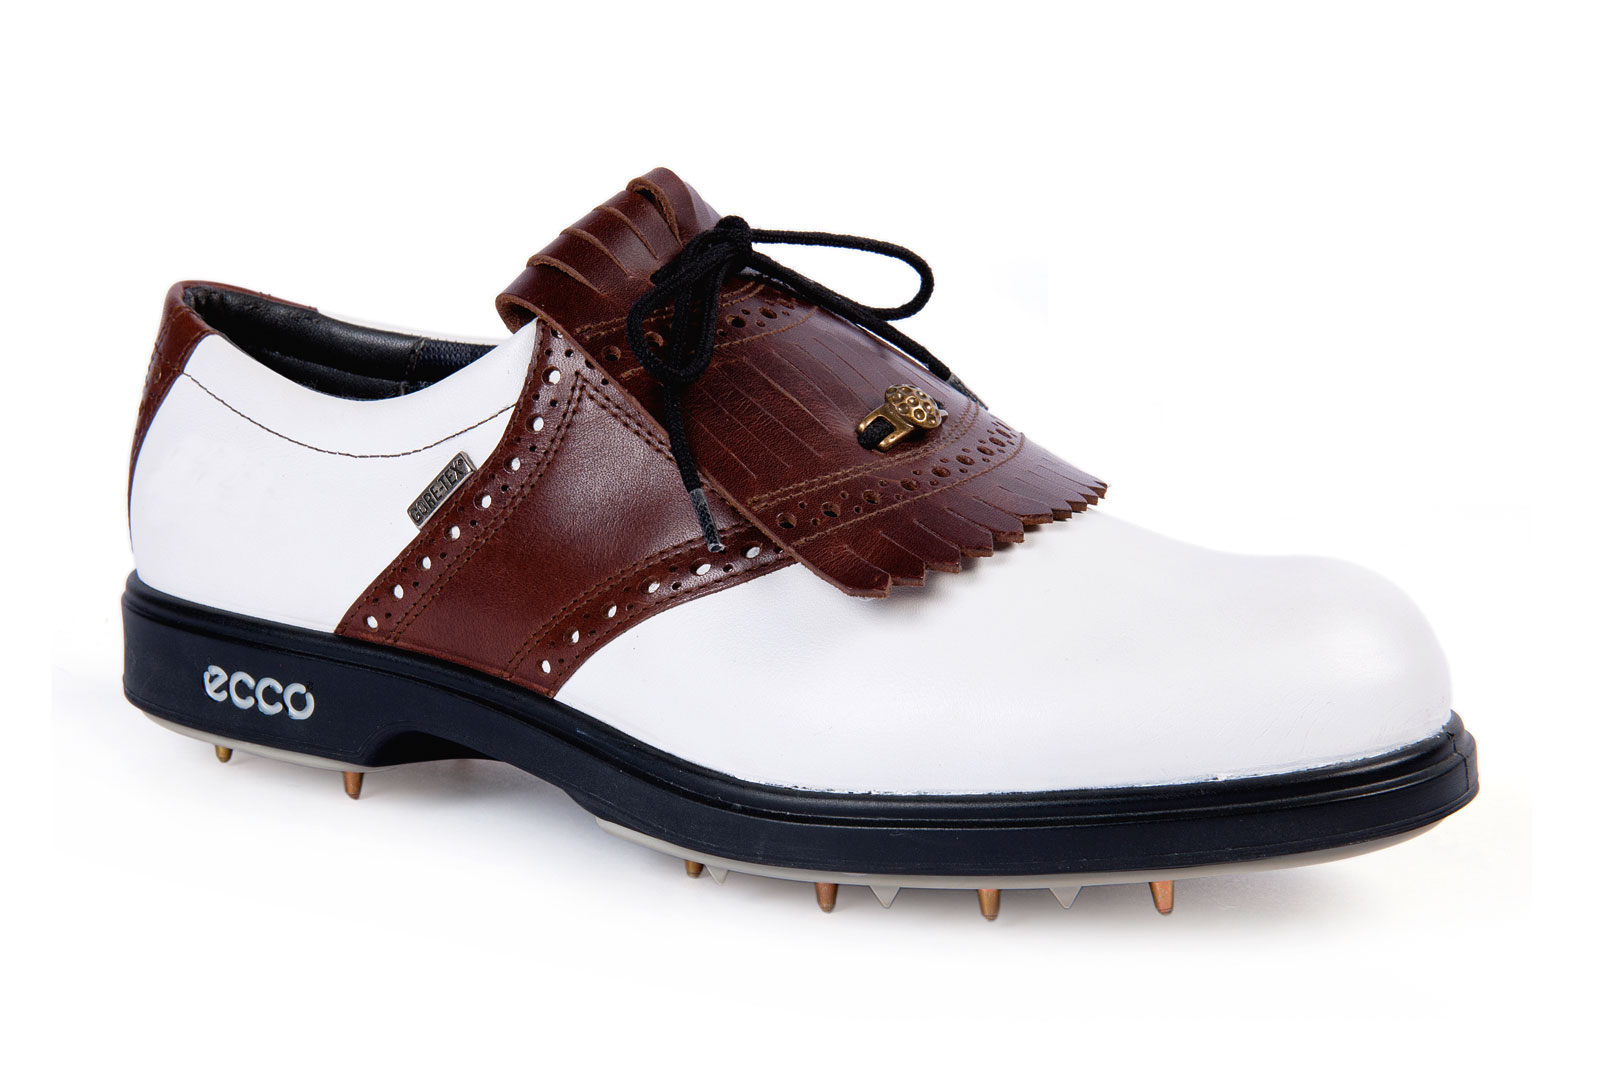 25 Years of ECCO Golf, 1996: The first pair of ECCO GOLF shoes is sold in Denmark